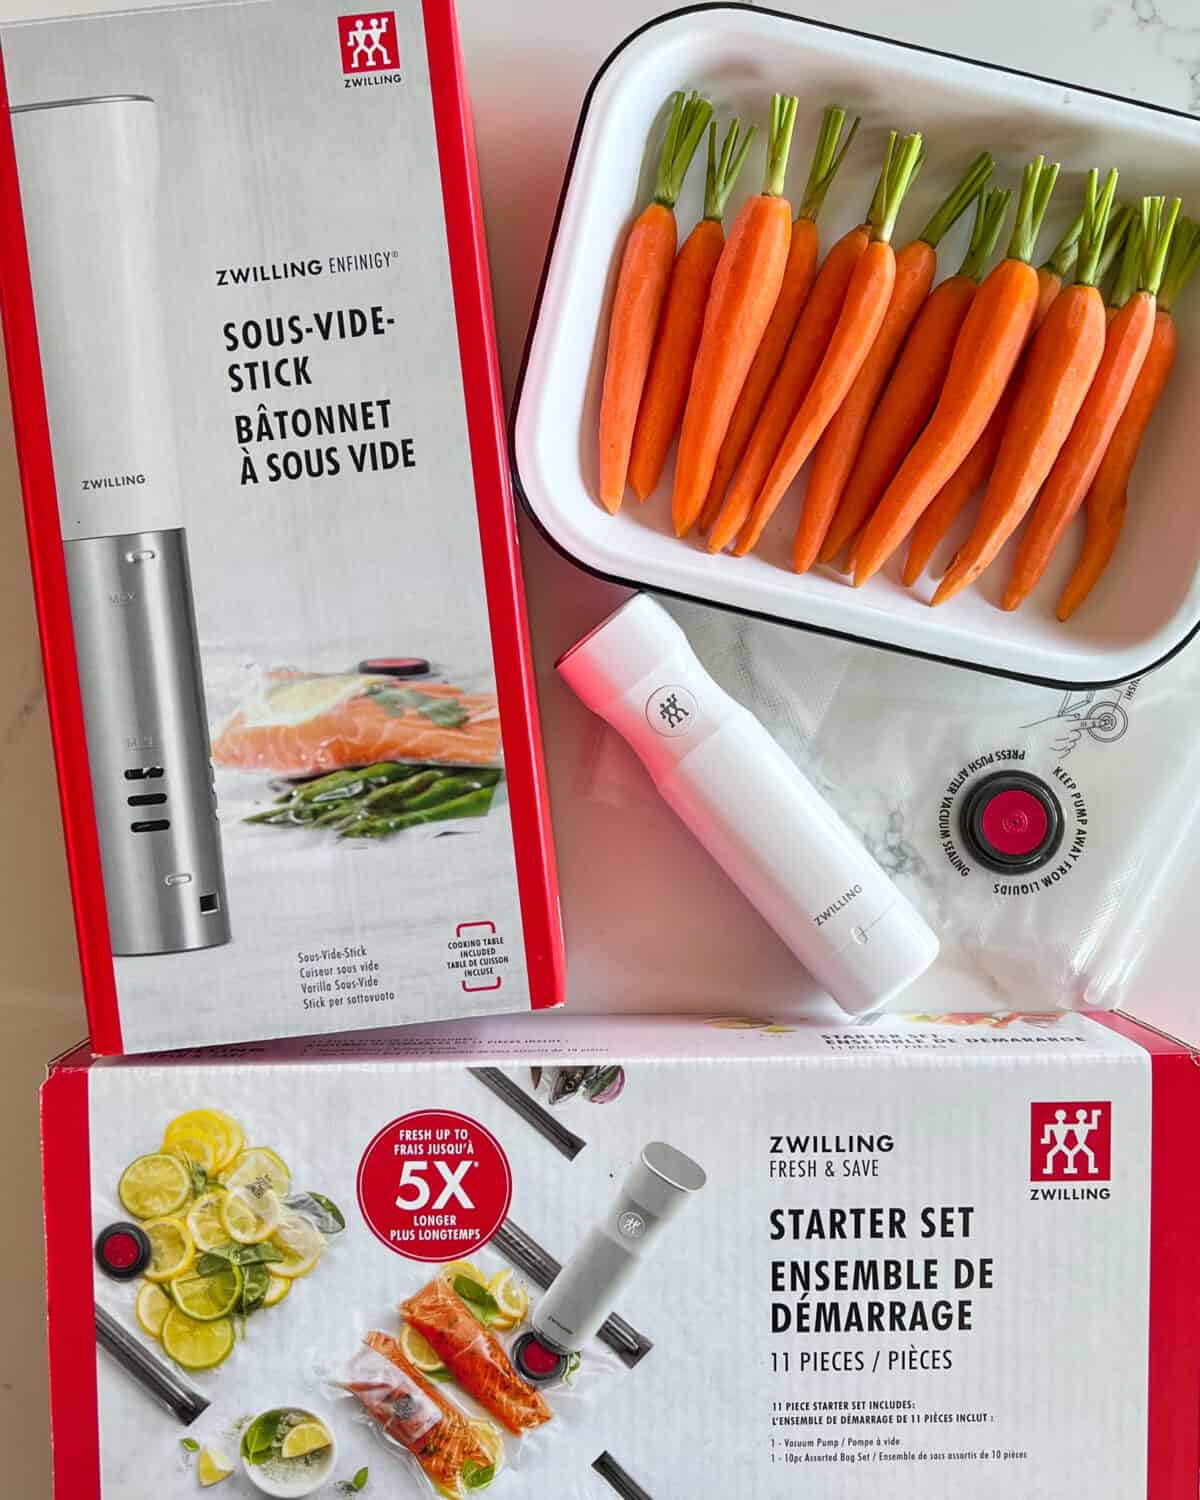 Zwilling sous-vide starter kit boxes with a tray of carrots.